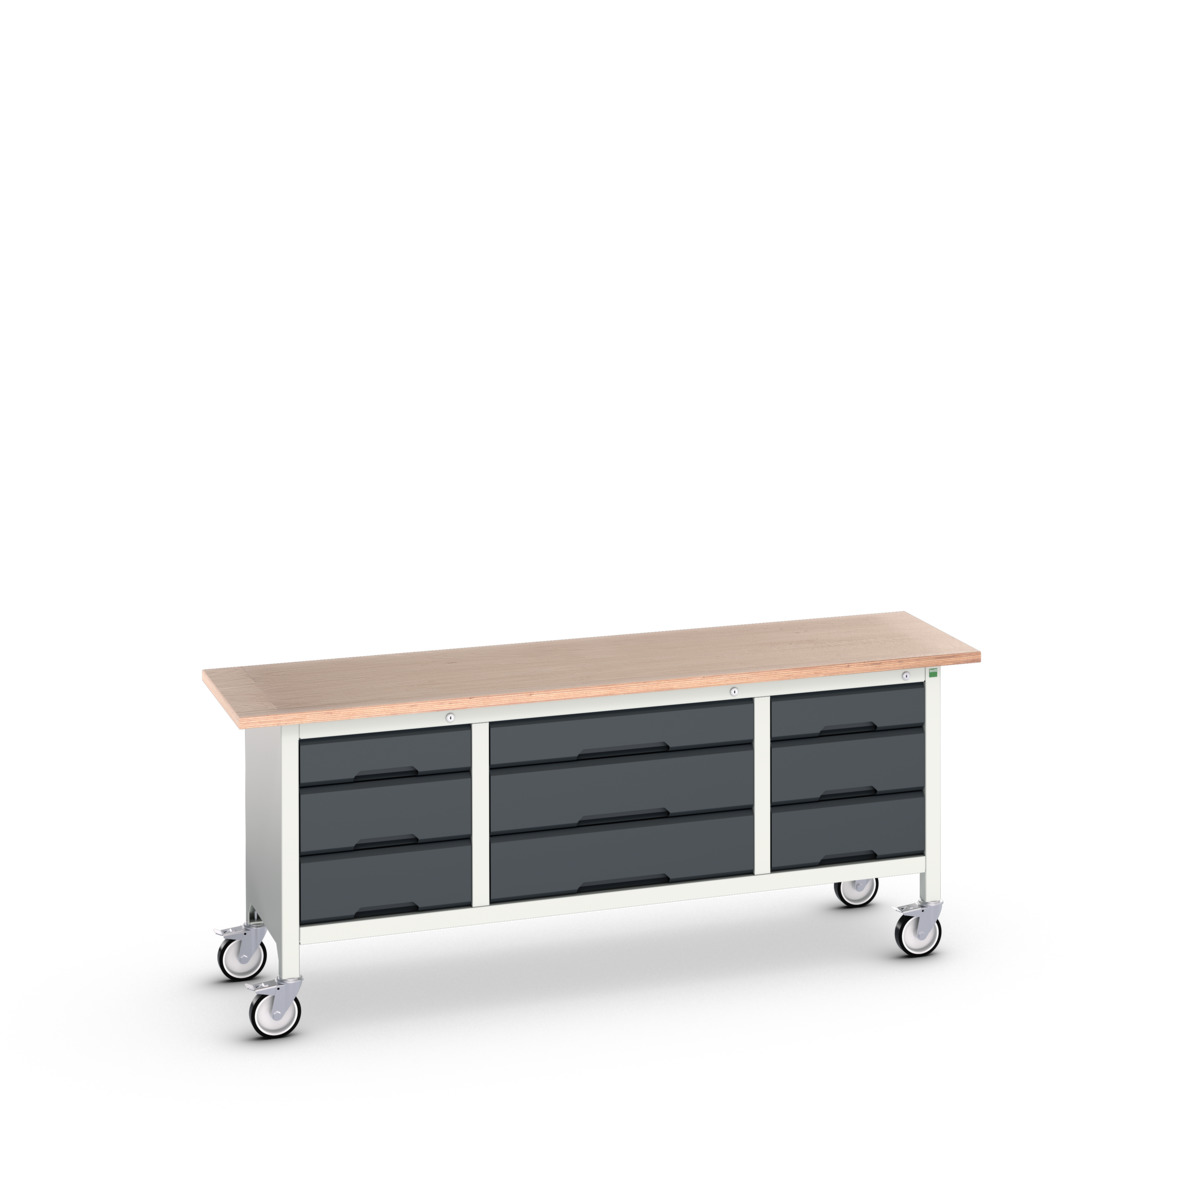 16923233. - verso mobile storage bench (mpx)